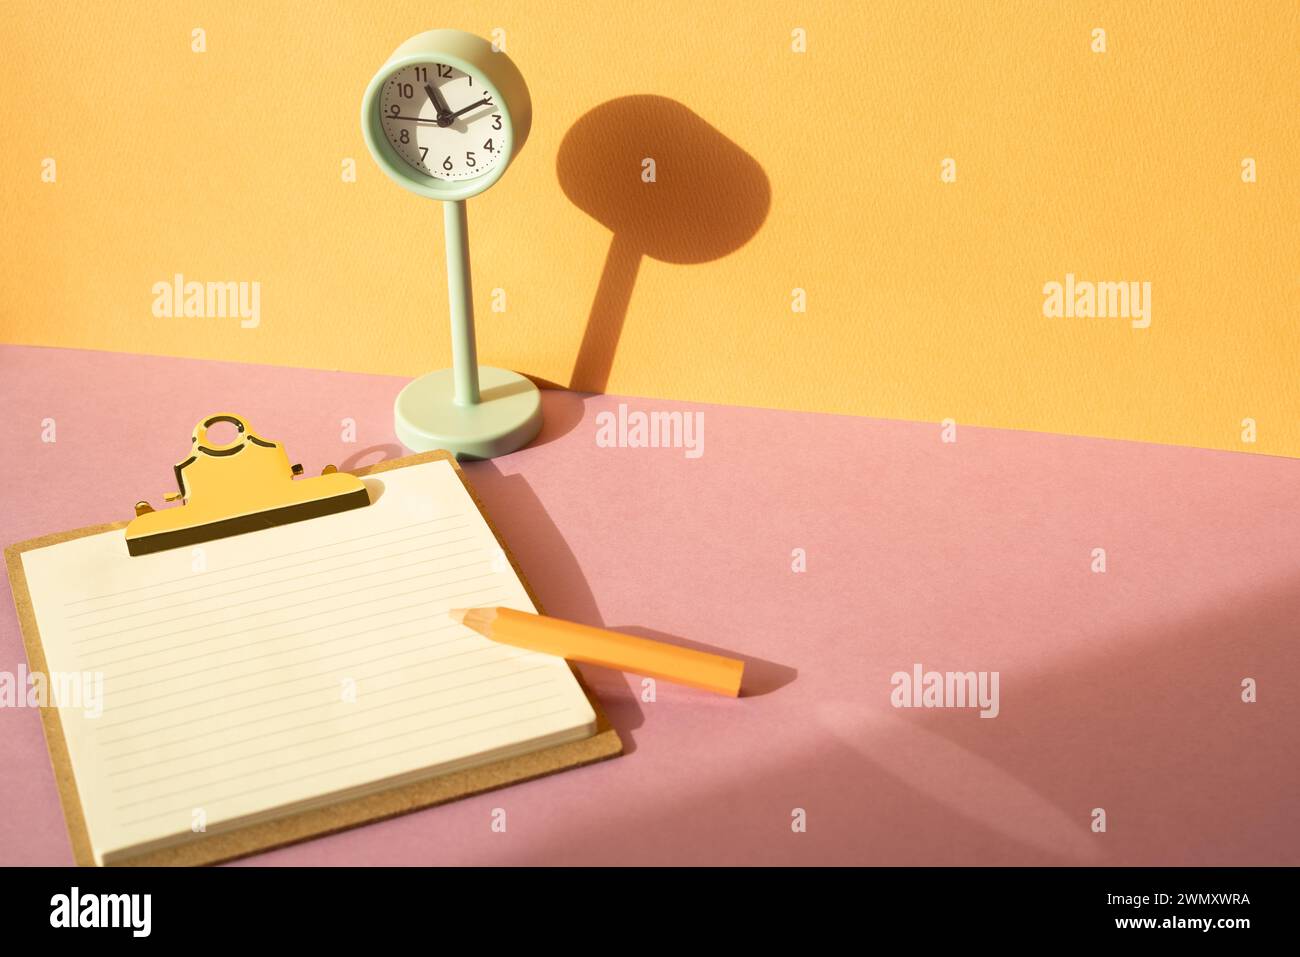 Clipboard and colored pencil, clock on pink desk. orange wall background. workspace Stock Photo